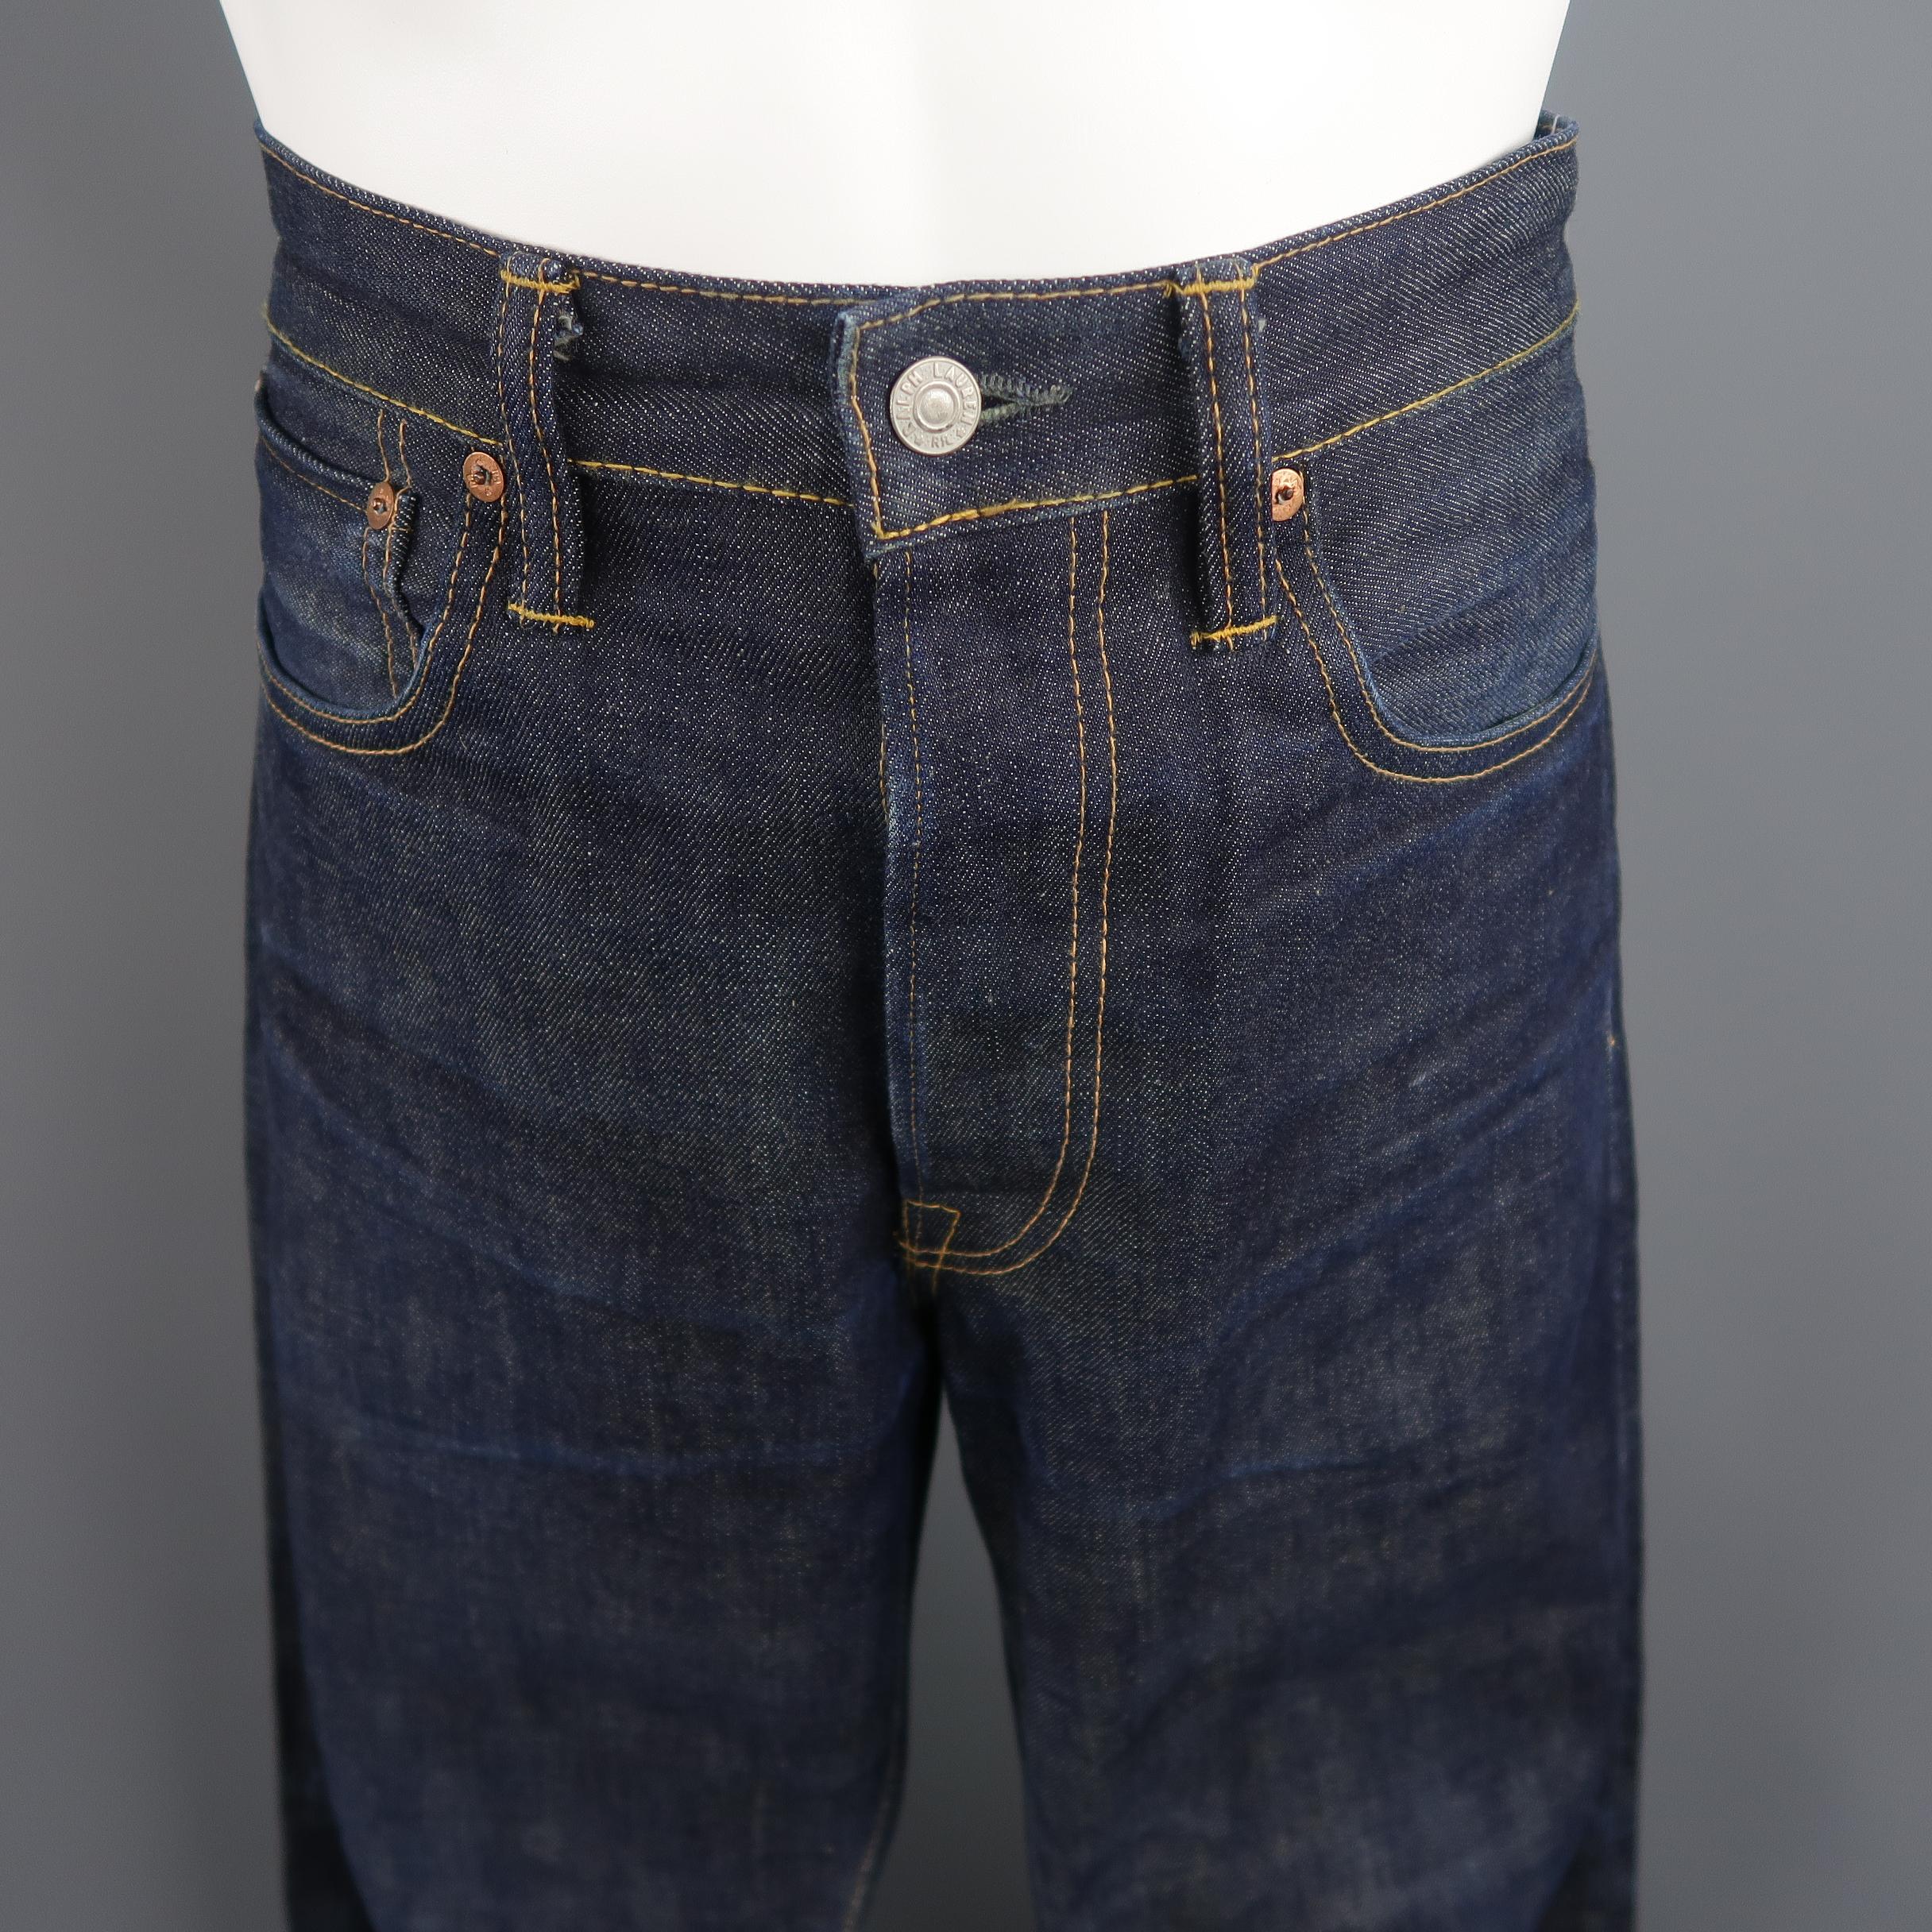 RRL by RALPH LAUREN jeans come in perfectly broken in indigo raw selvage denim with a classic fit and yellow contrast stitching. As-is.  Made in USA.
 
Fair Pre-Owned Condition.
Marked: 32 X 32
 
Measurements:
 
Waist: 34 in.
Rise: 10 in.
Inseam: 